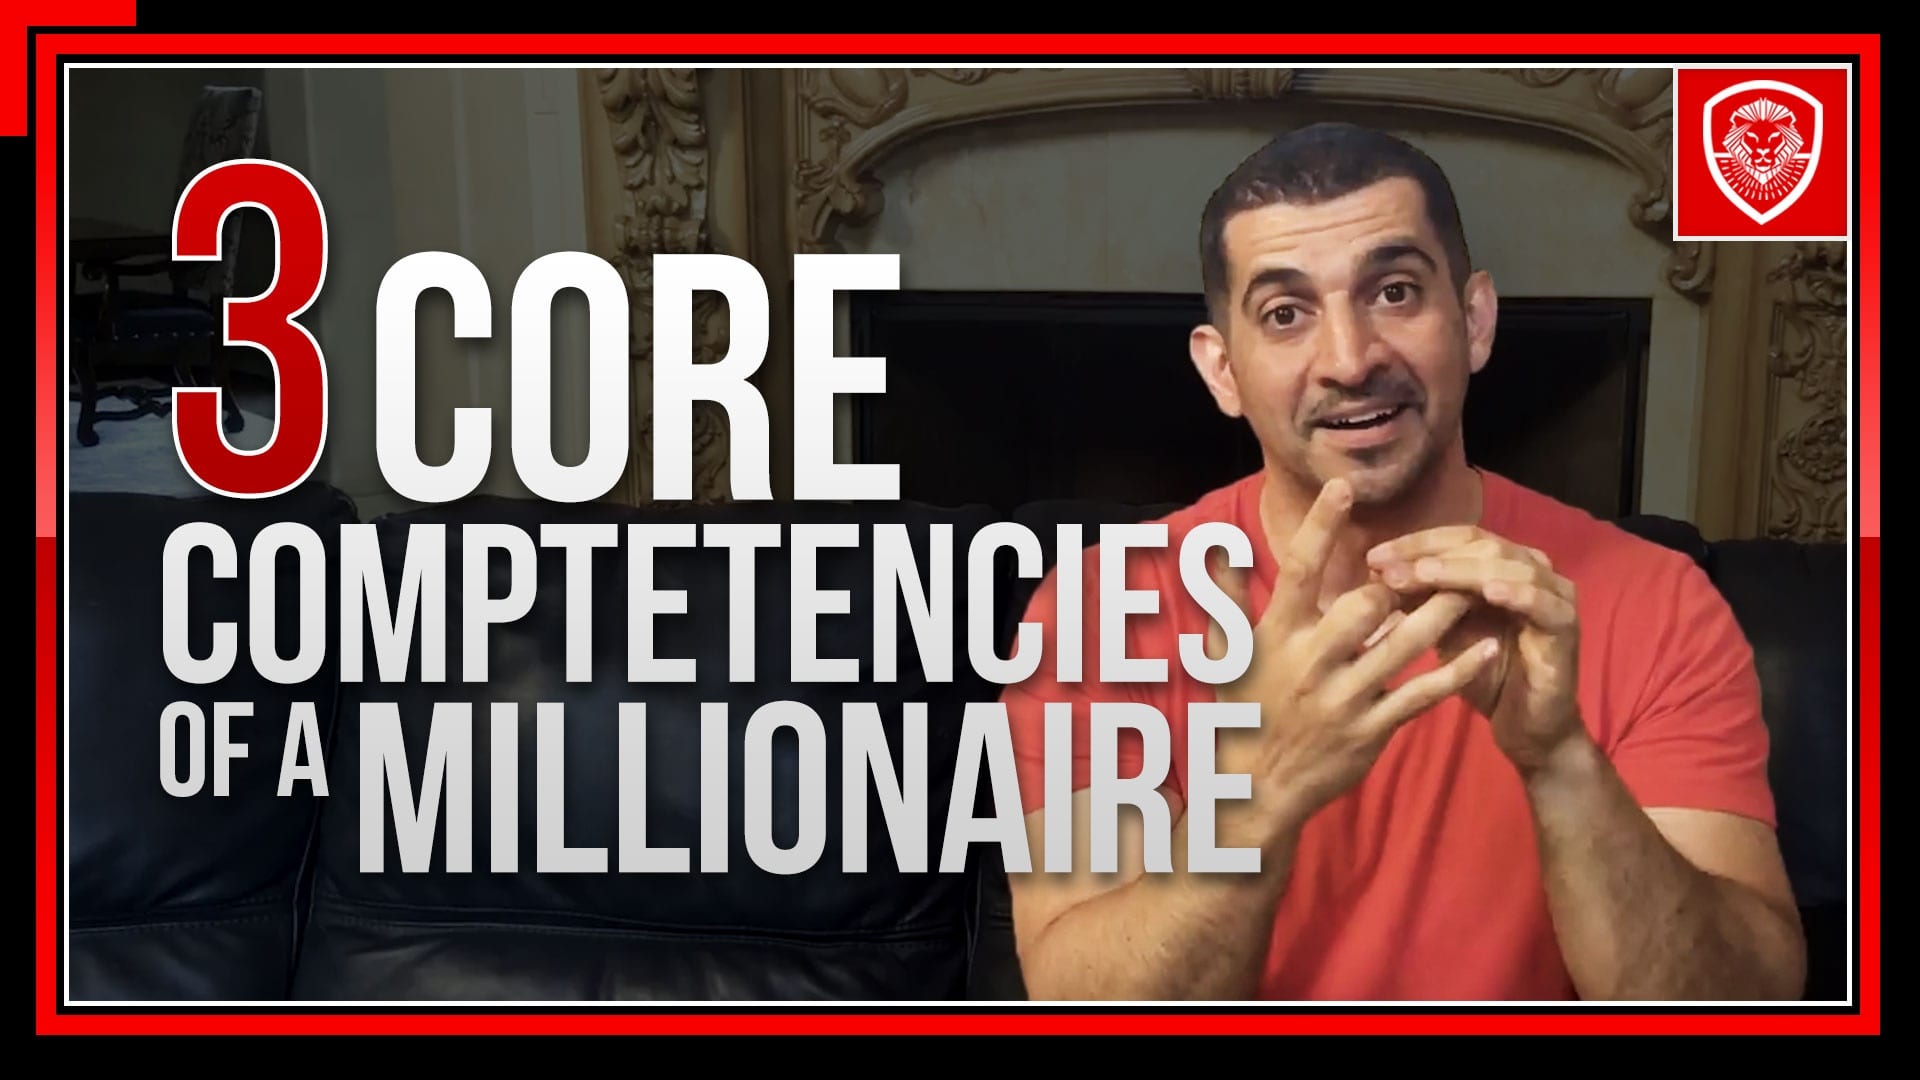 Every wealthy person fits into one of the three core competencies that every millionaire masters. Which of the three core competencies describes you?